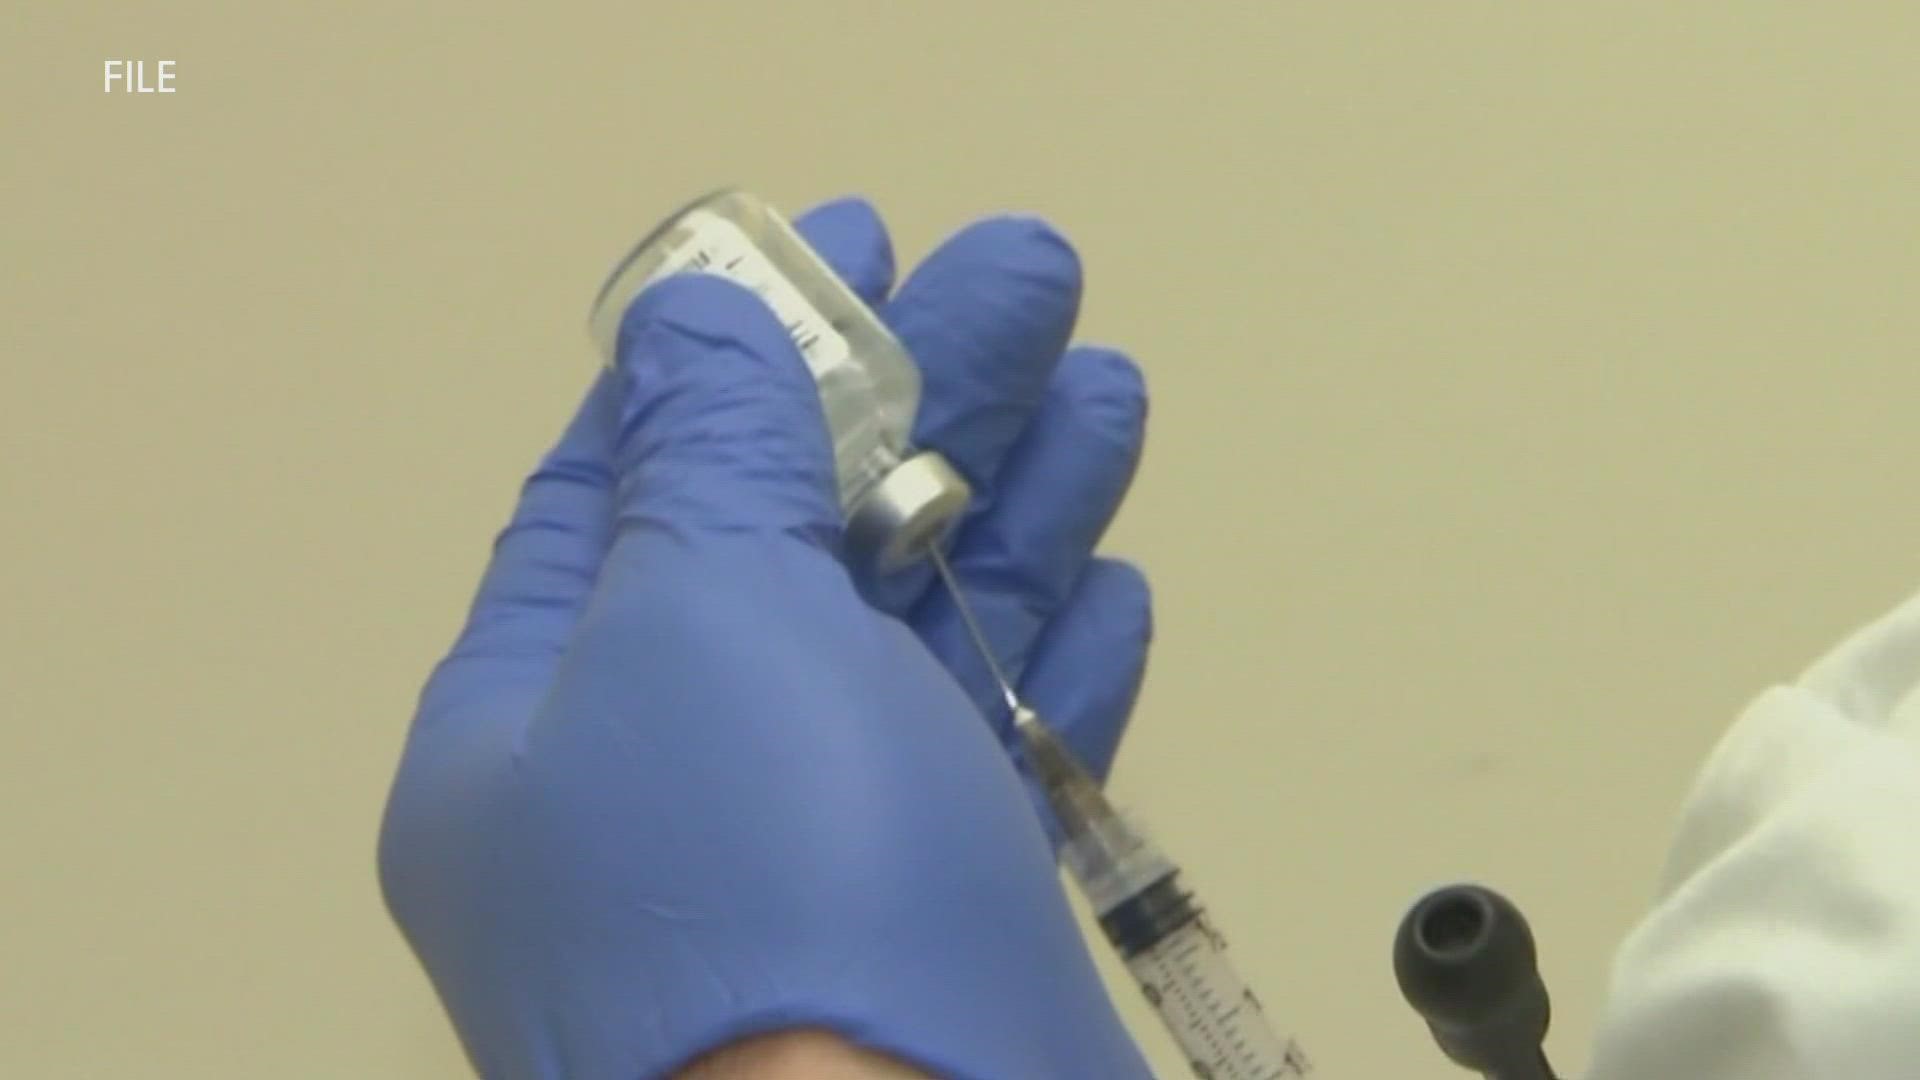 One West Michigan doctor says a vaccine for children ages 5 to 11 could mean different quarantine guidelines and less outbreaks.